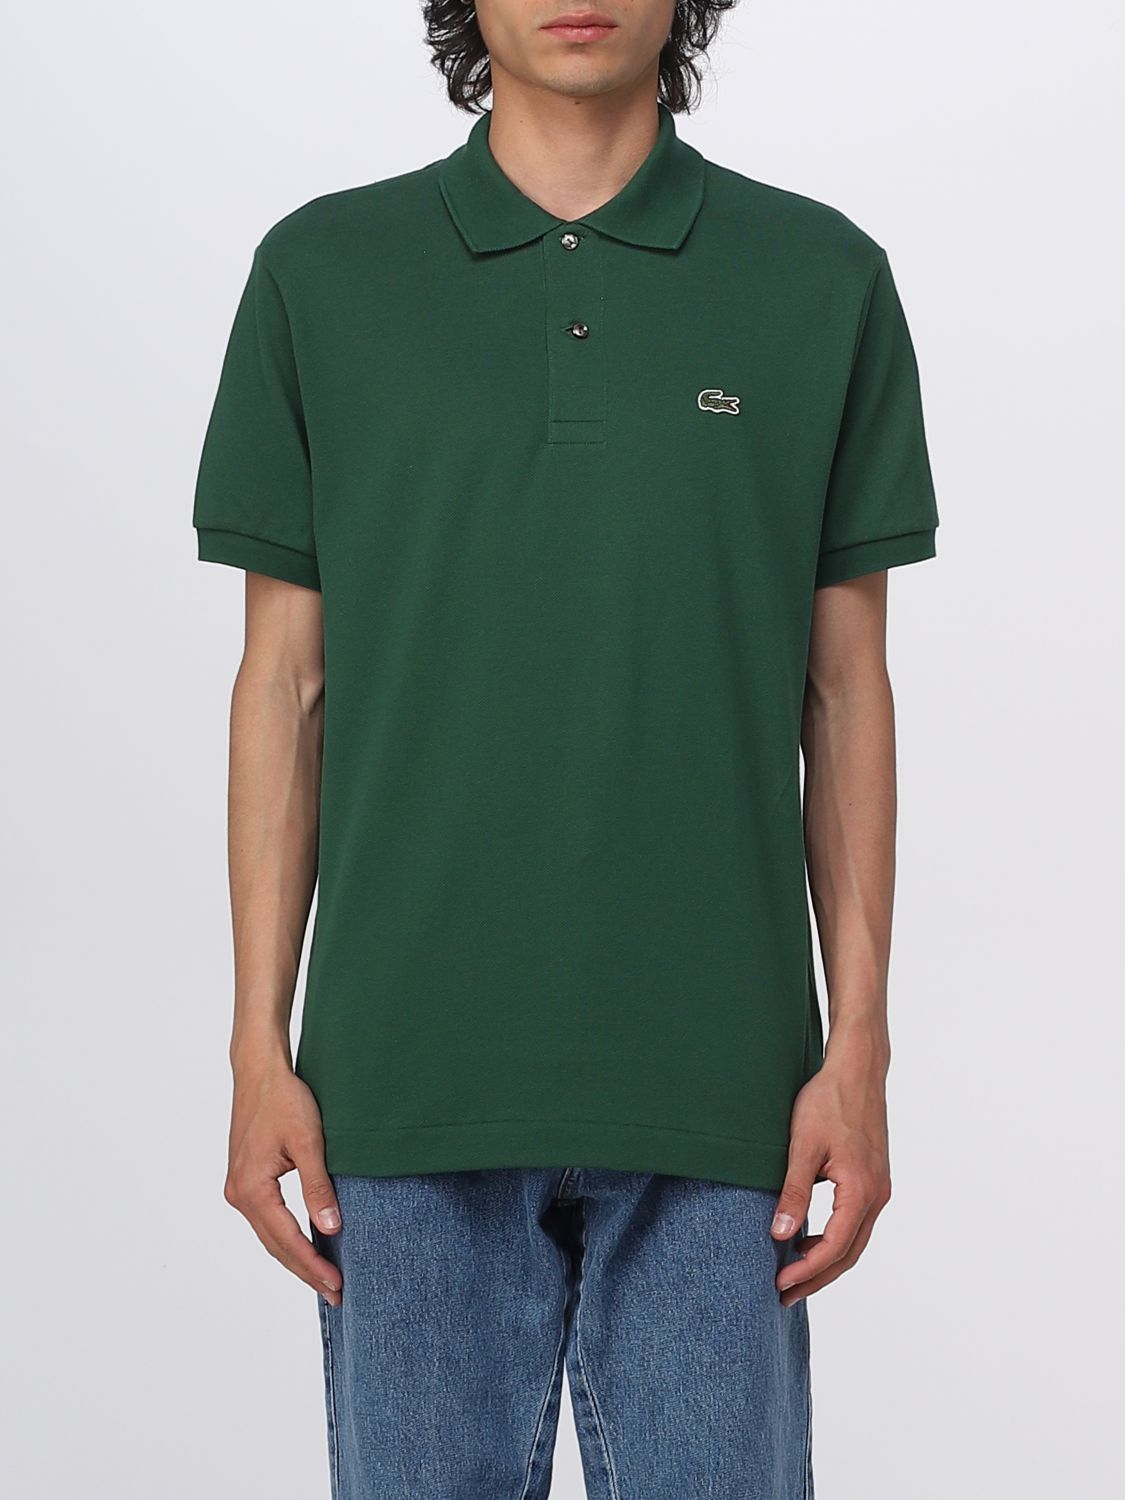 microfoon As Verstrooien LACOSTE: polo shirt for man - Forest Green | Lacoste polo shirt L1212 online  on GIGLIO.COM